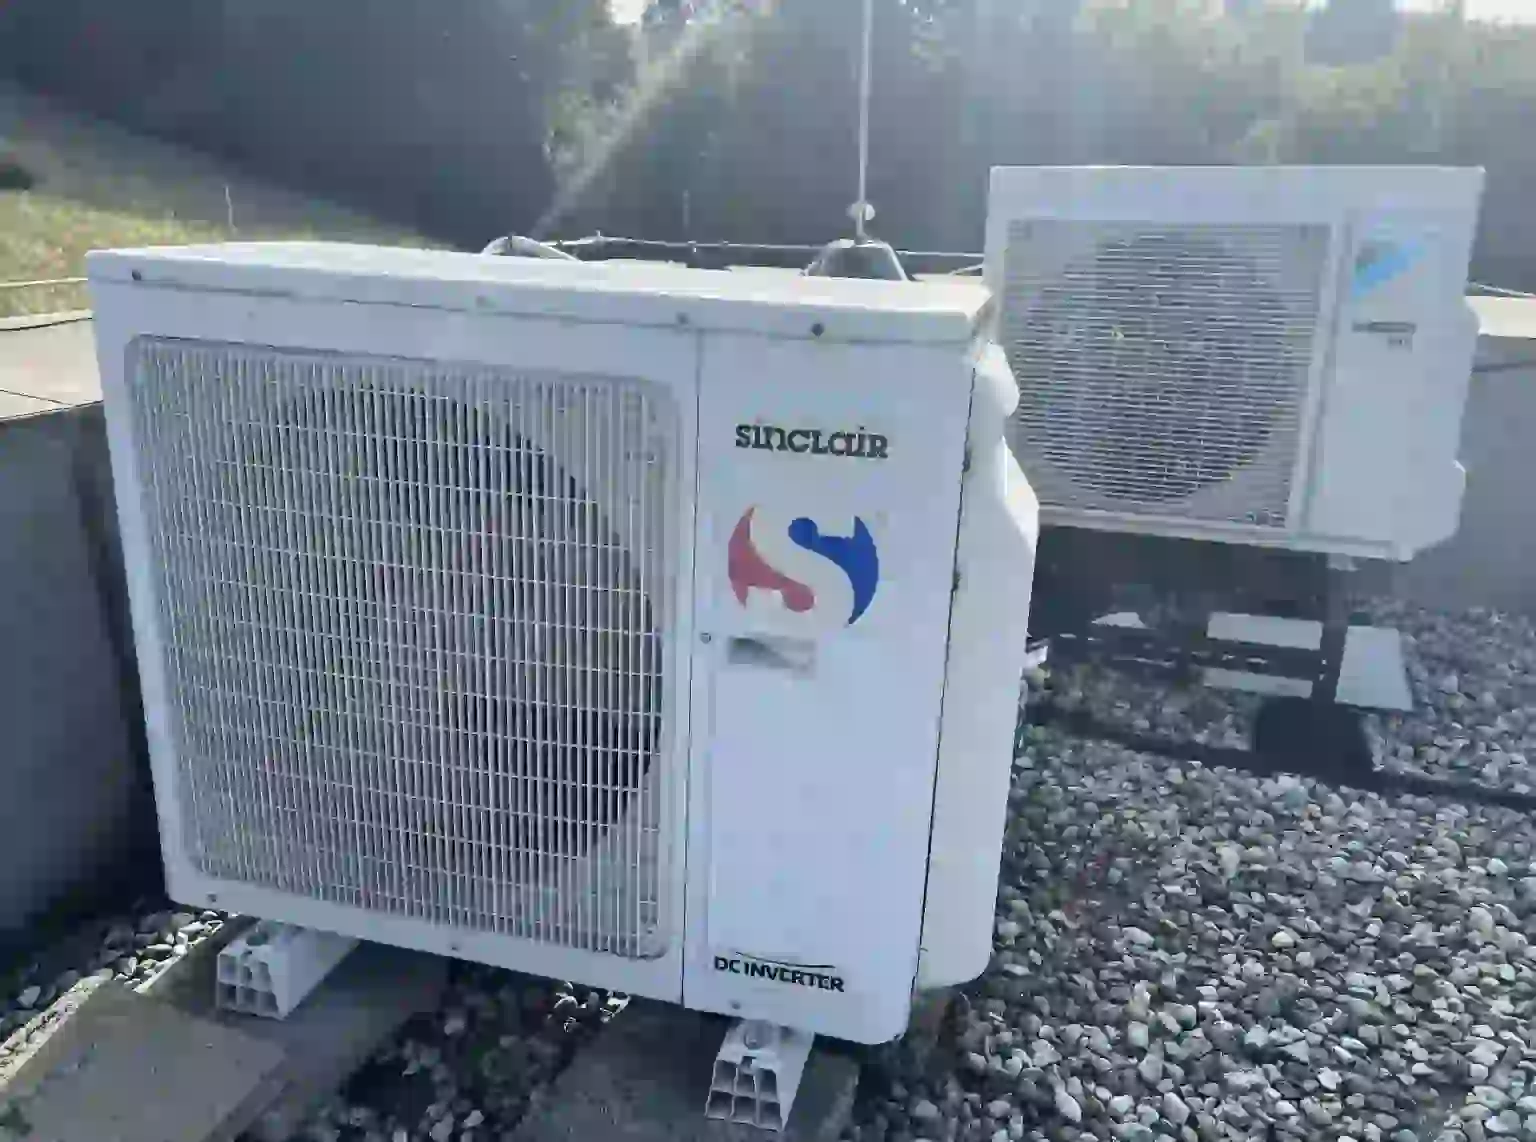 A blue outdoor air conditioner with white text reading "SINICLCİR DC INVERTER" in the image.